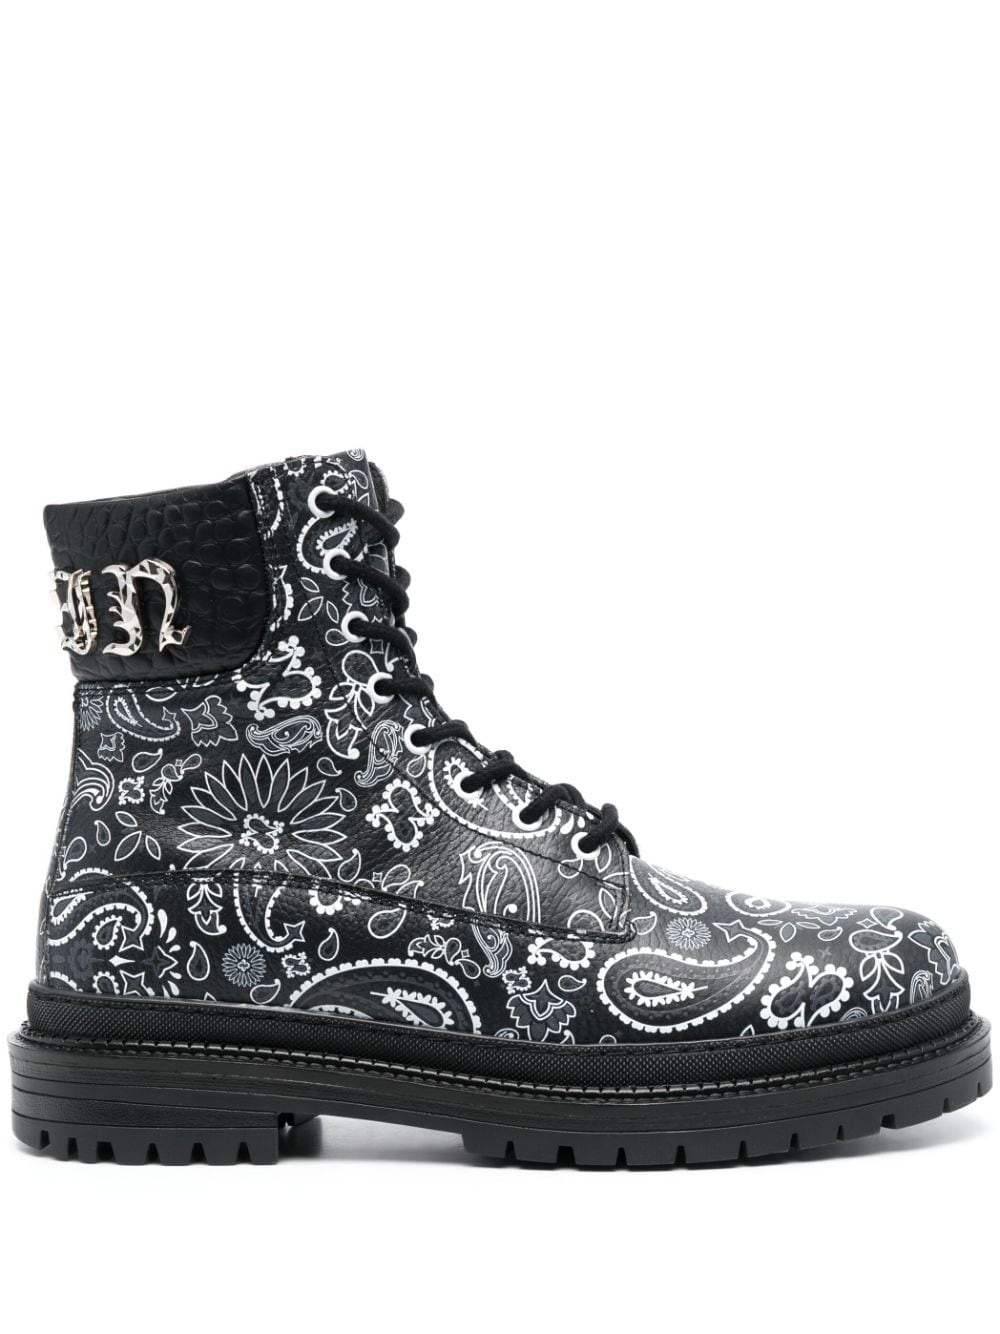 paisley-print leather ankle boots - 1